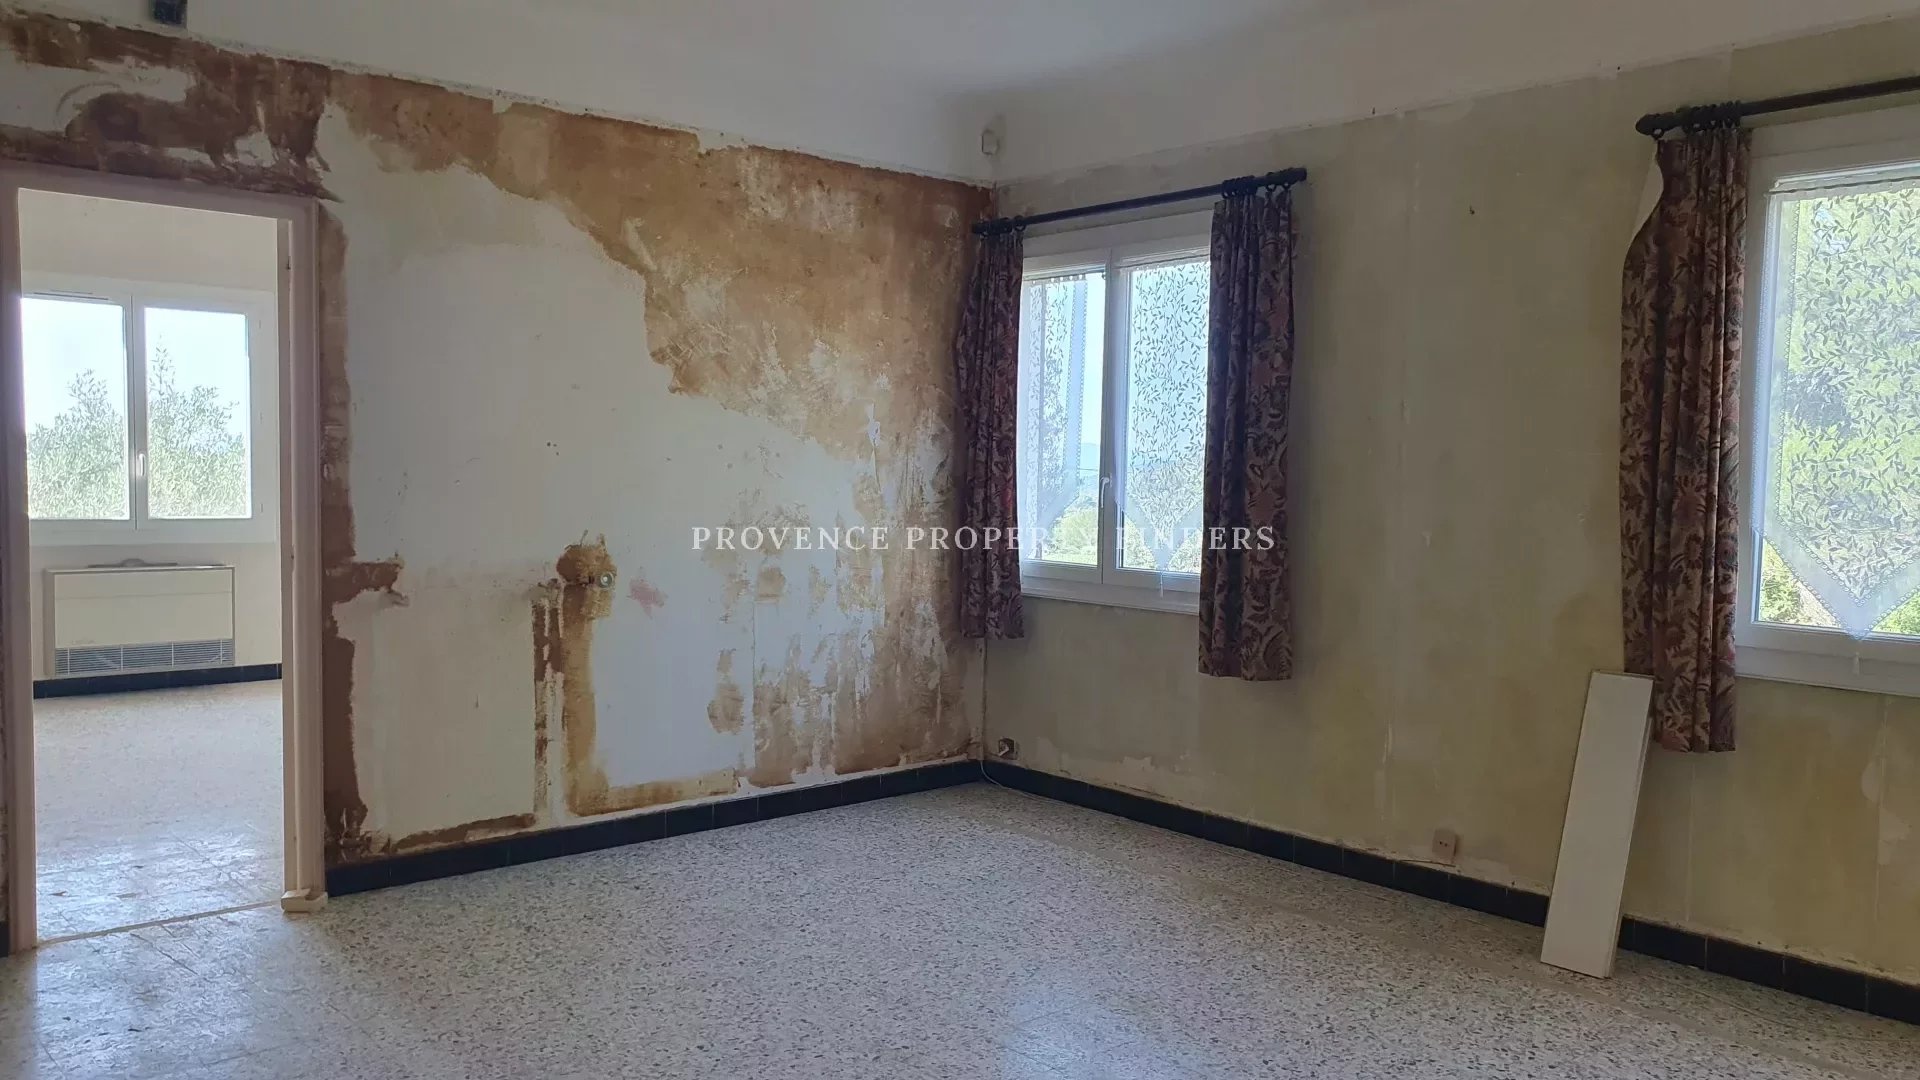 Renovation project. A 300 m2 villa on 5200m2 to renovate to your likings.